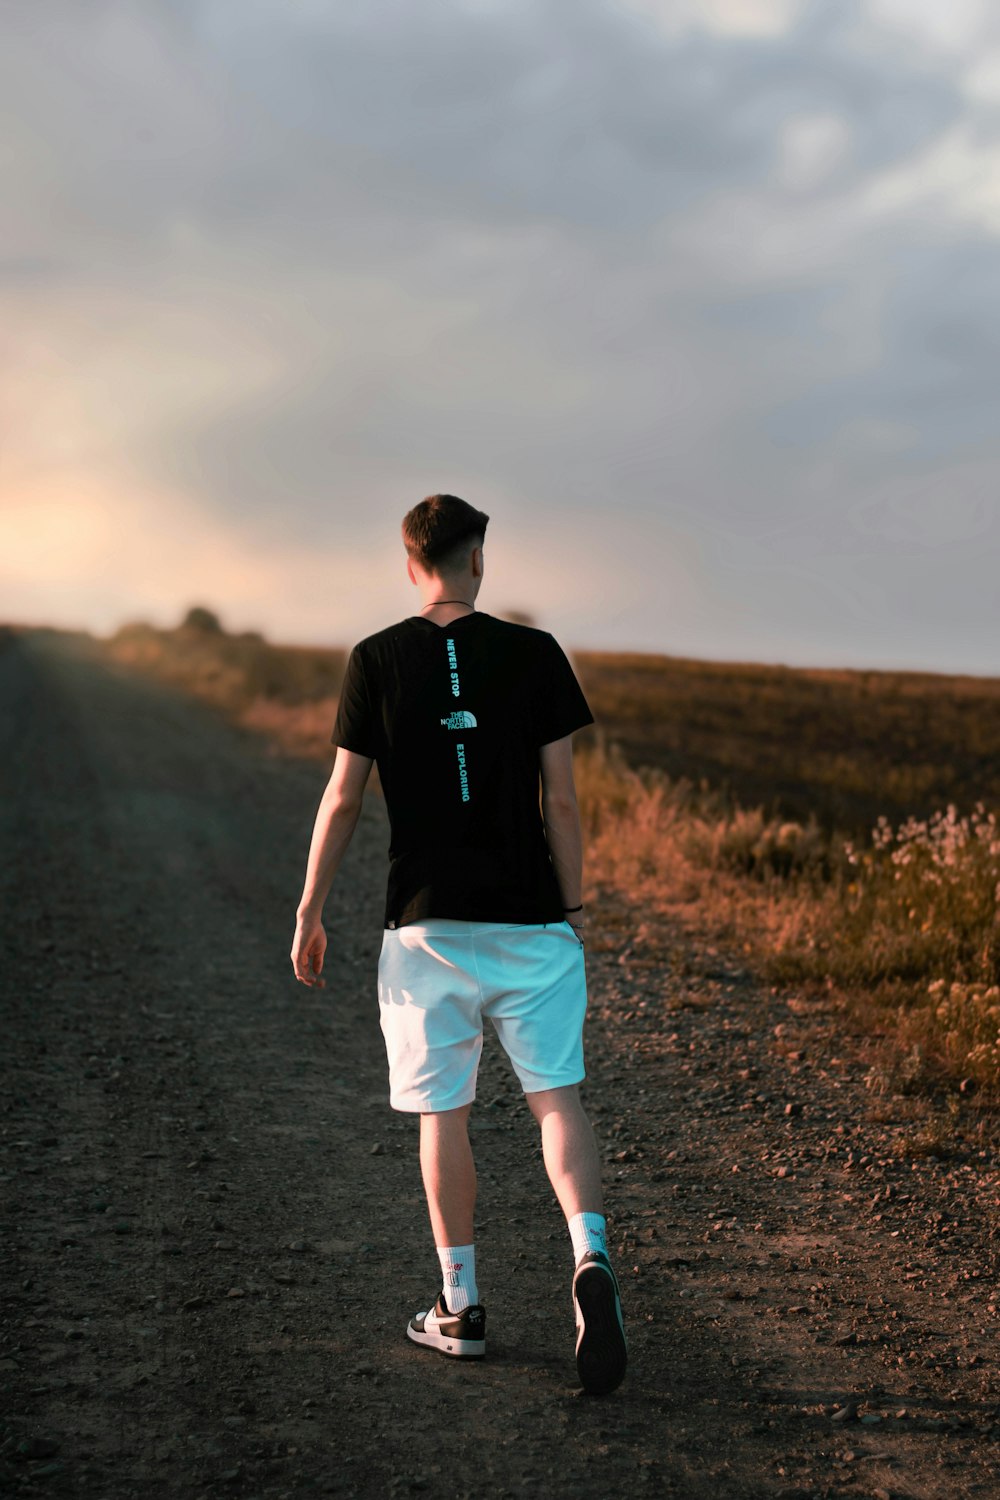 a man walking down a dirt road with a cross on his shirt